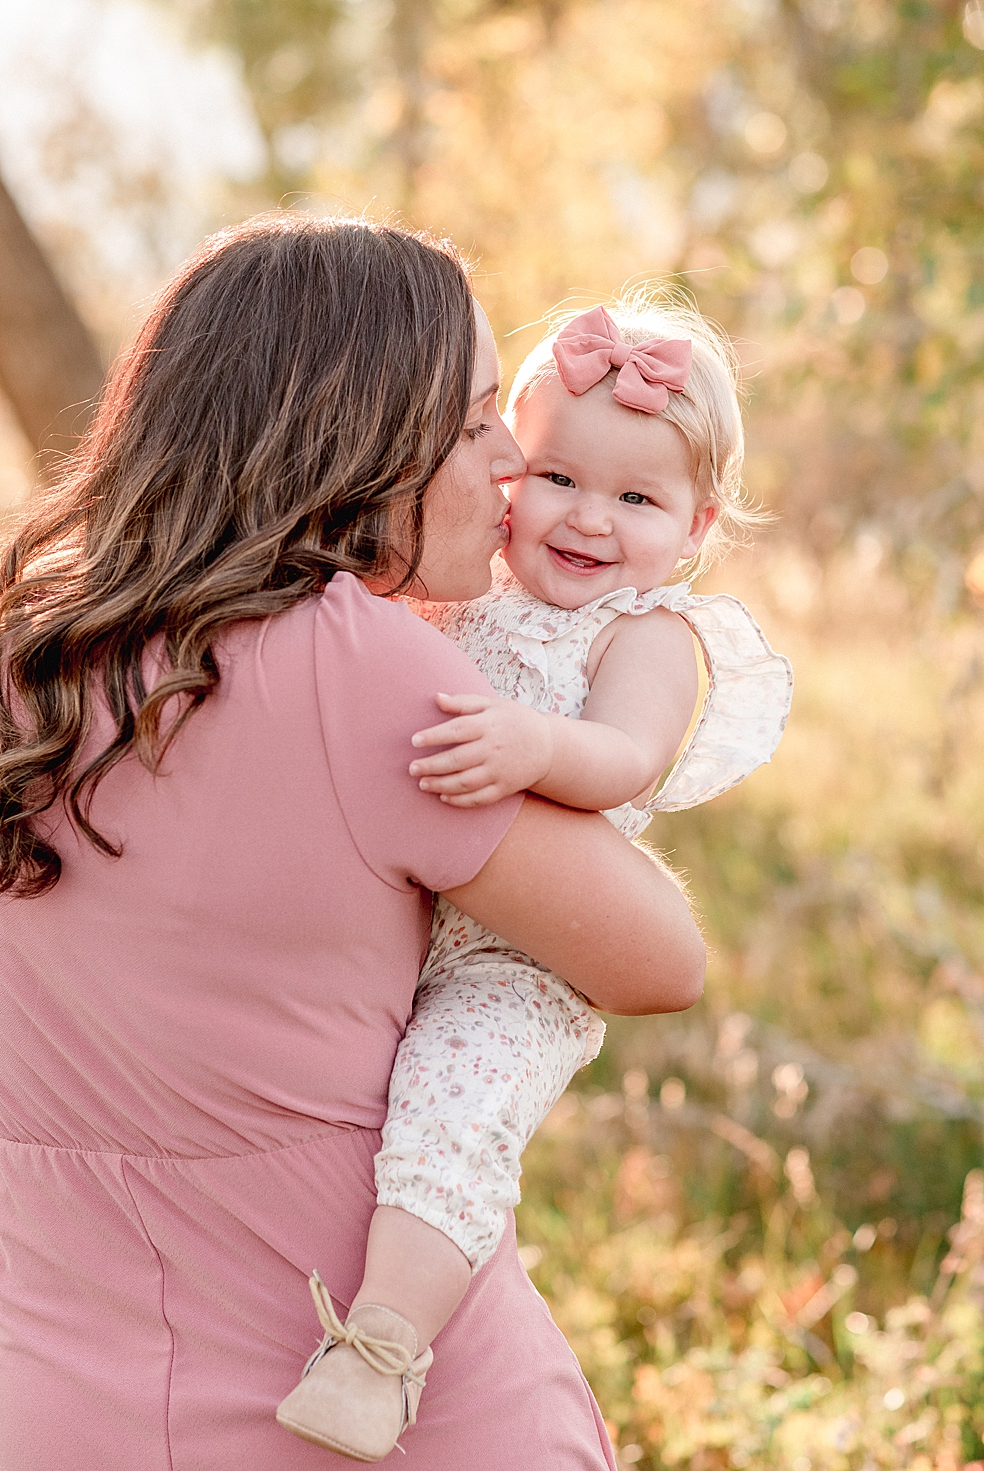 Mom in pink dress giving toddler baby a kiss | Photo by Jessica Lee Photography